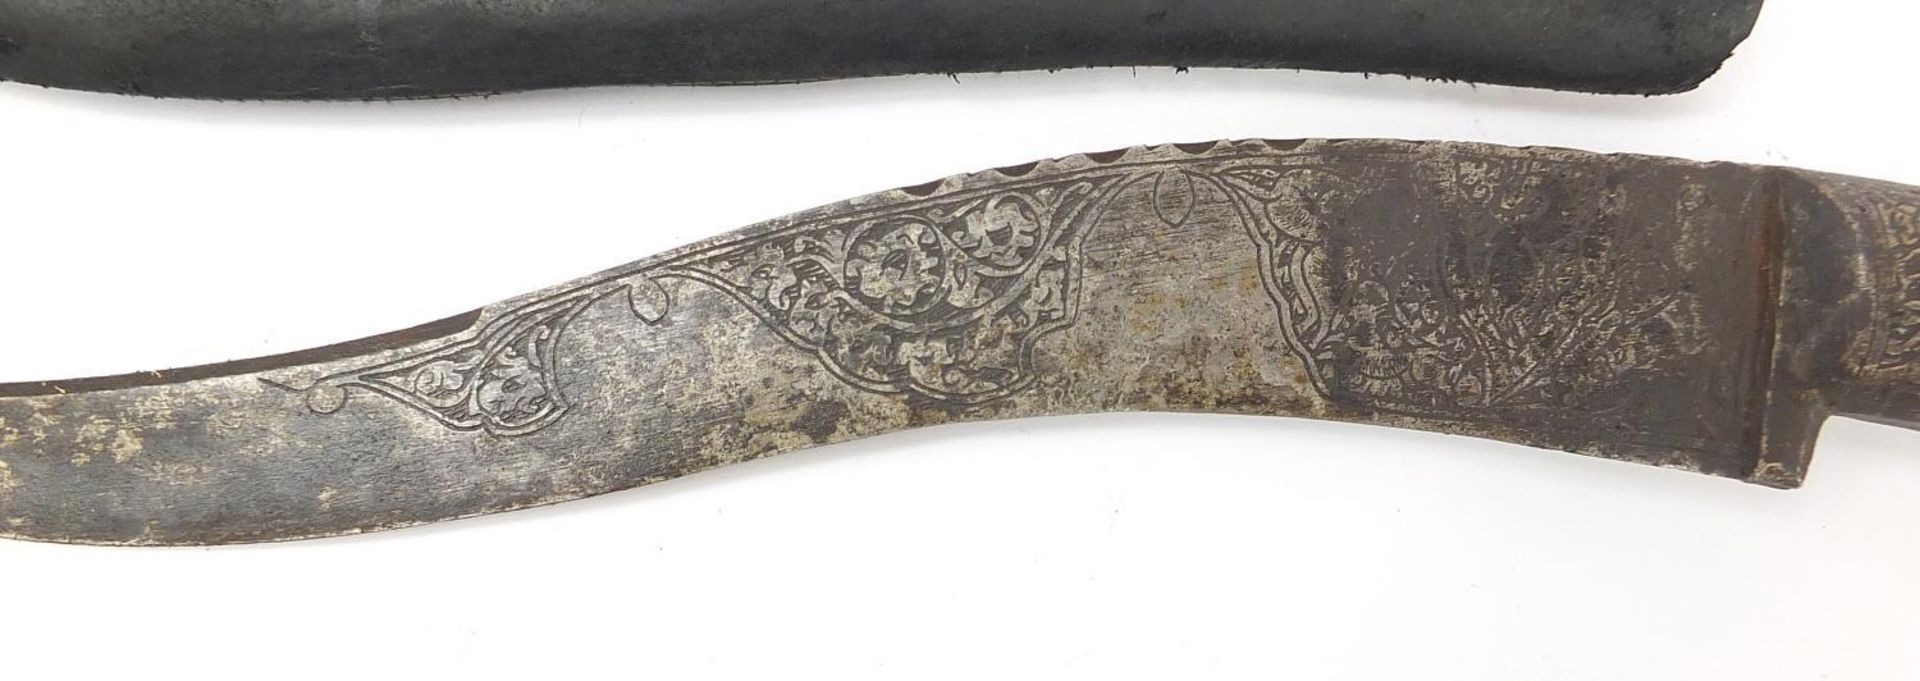 Afghan Pesh-kabz knife with bone handle, sheath and steel blade engraved with a wild animals and - Image 4 of 8